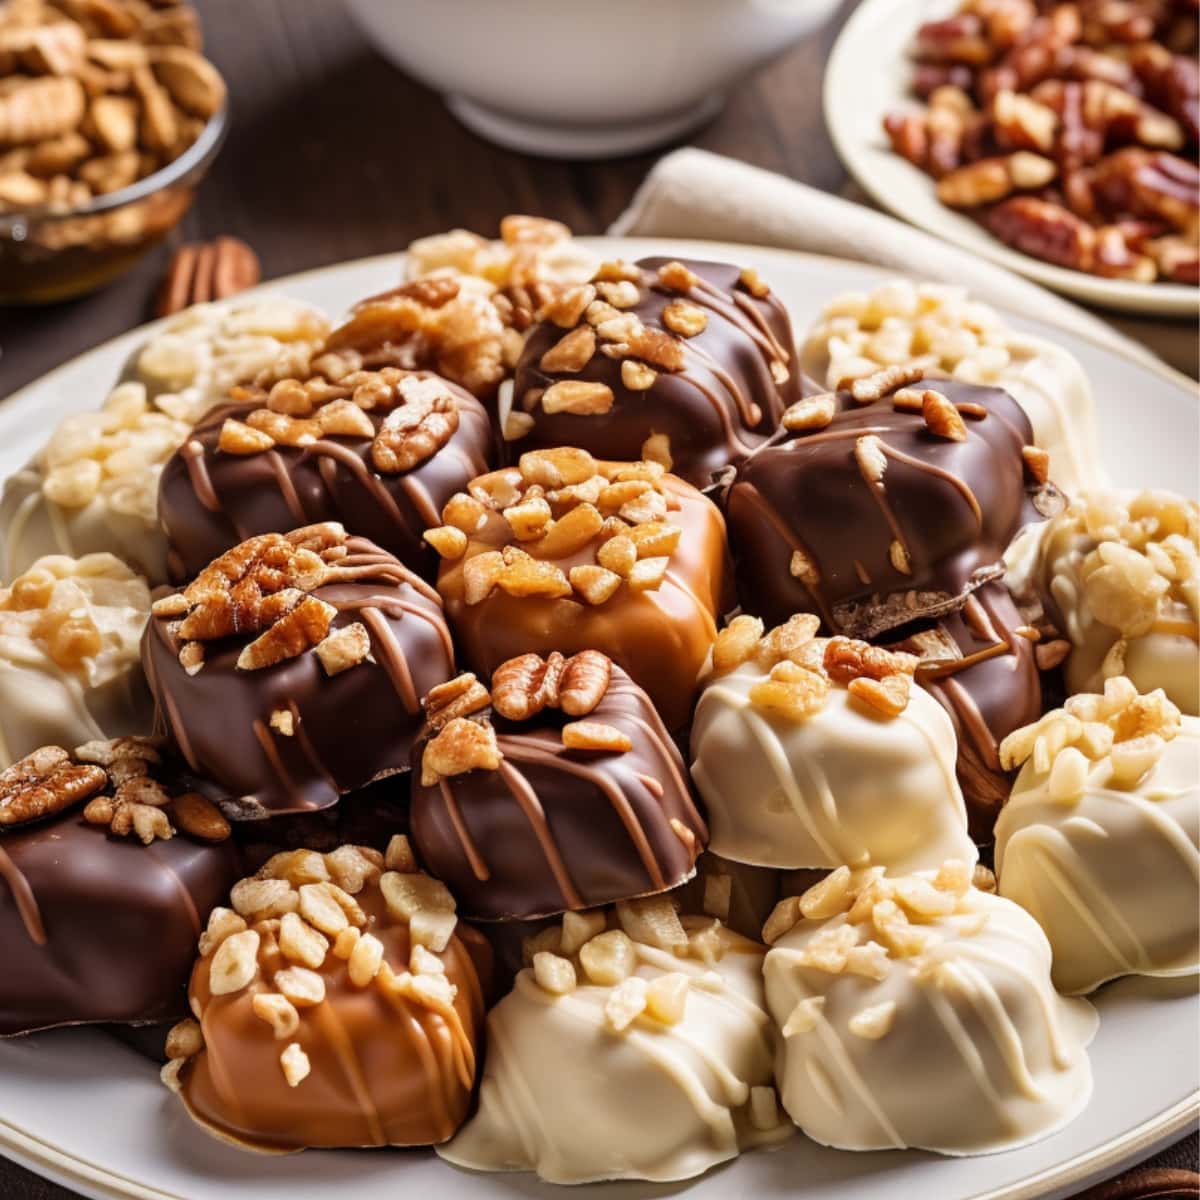 A variety of chocolate pralines in a white plate on a wooden board